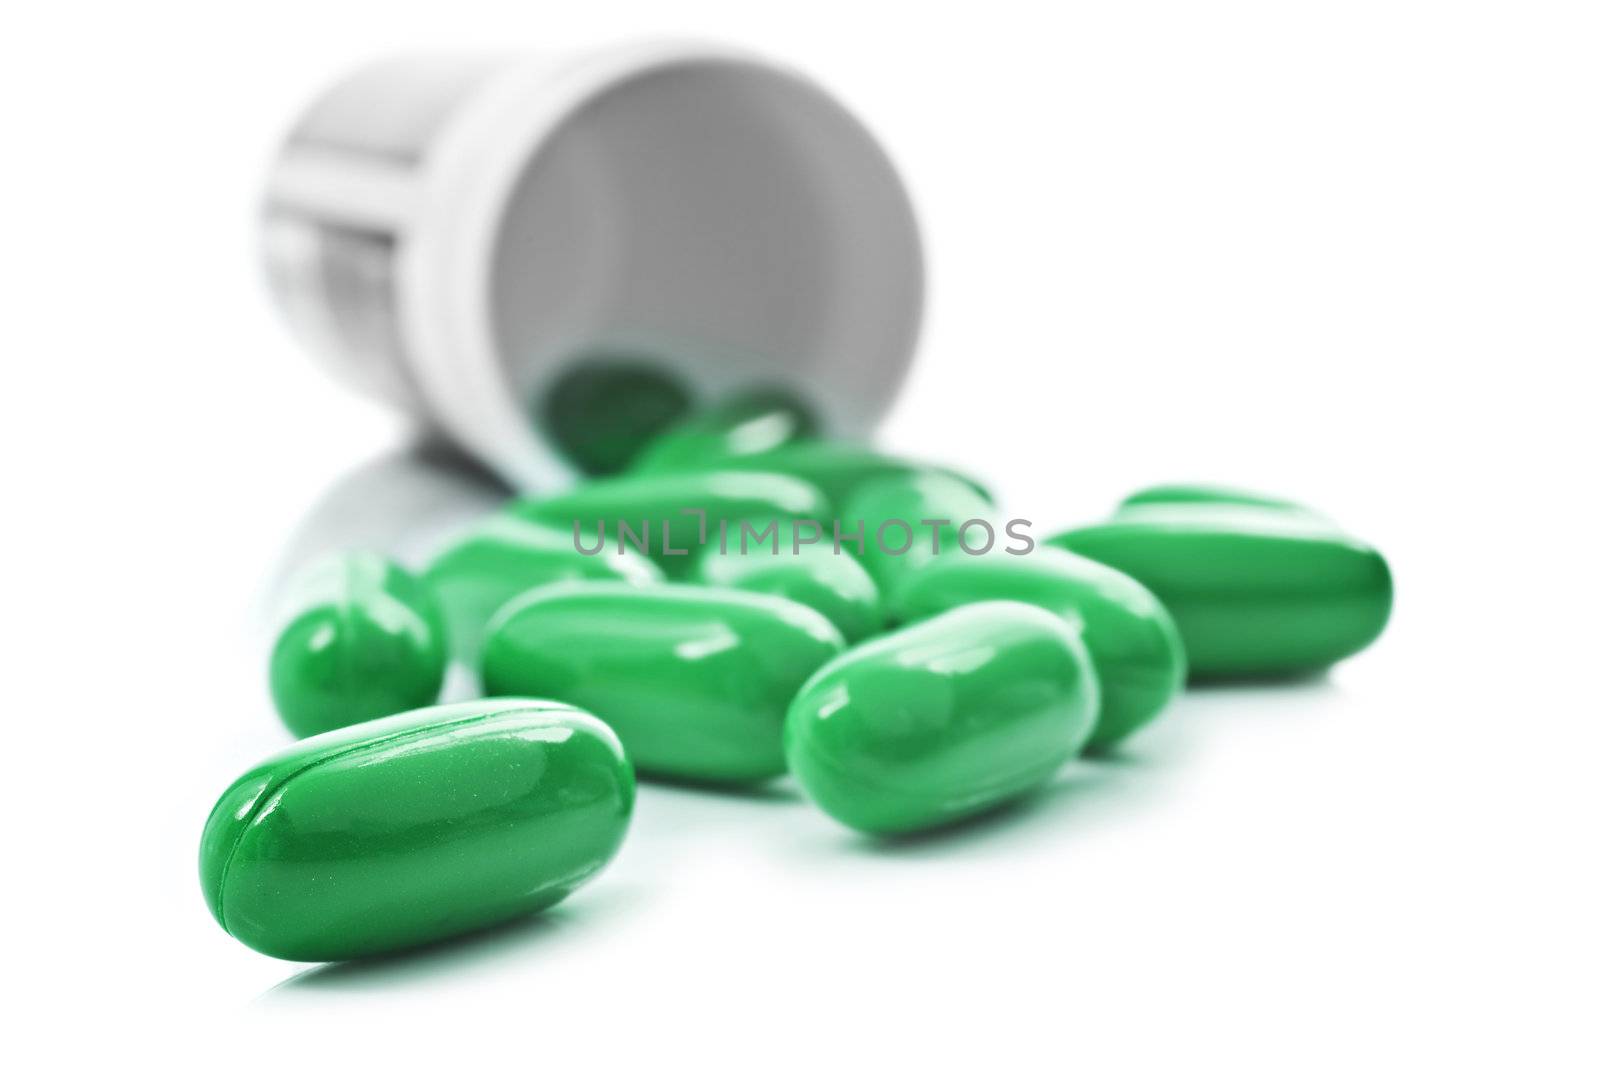 Green pills an pill bottle on white background by tish1